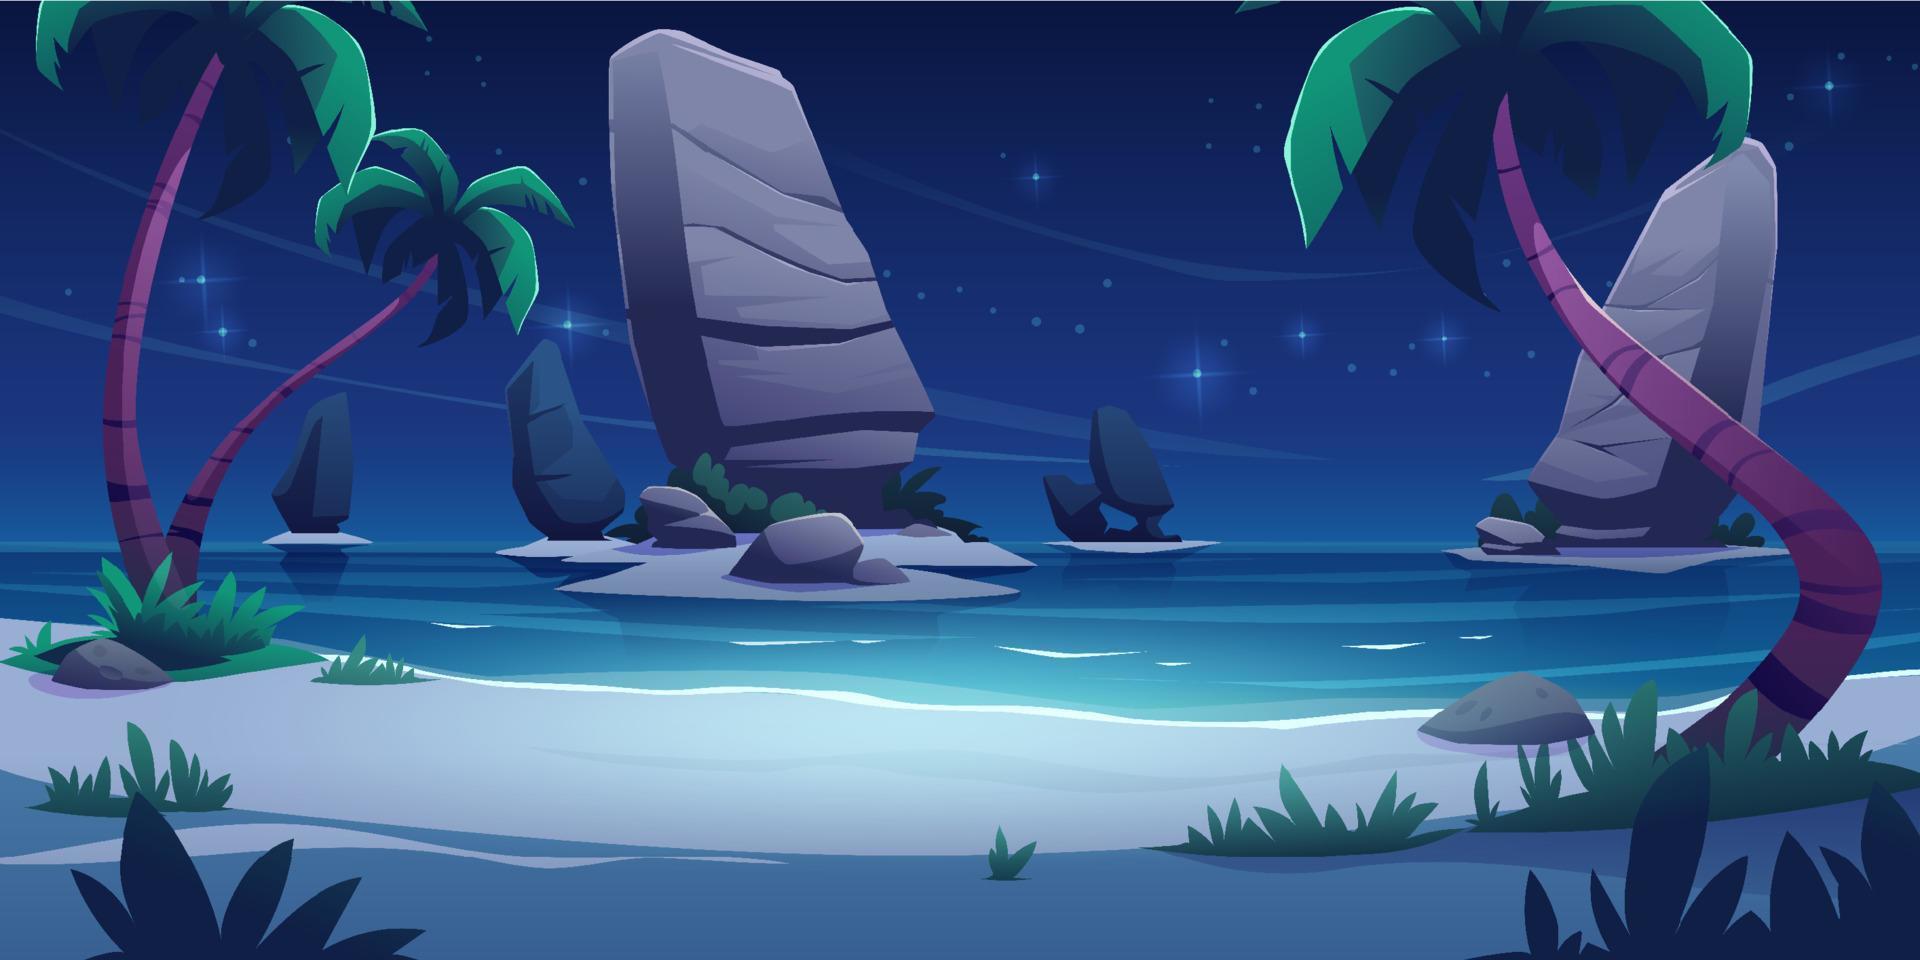 Ocean beach with palm trees and rocks at night vector